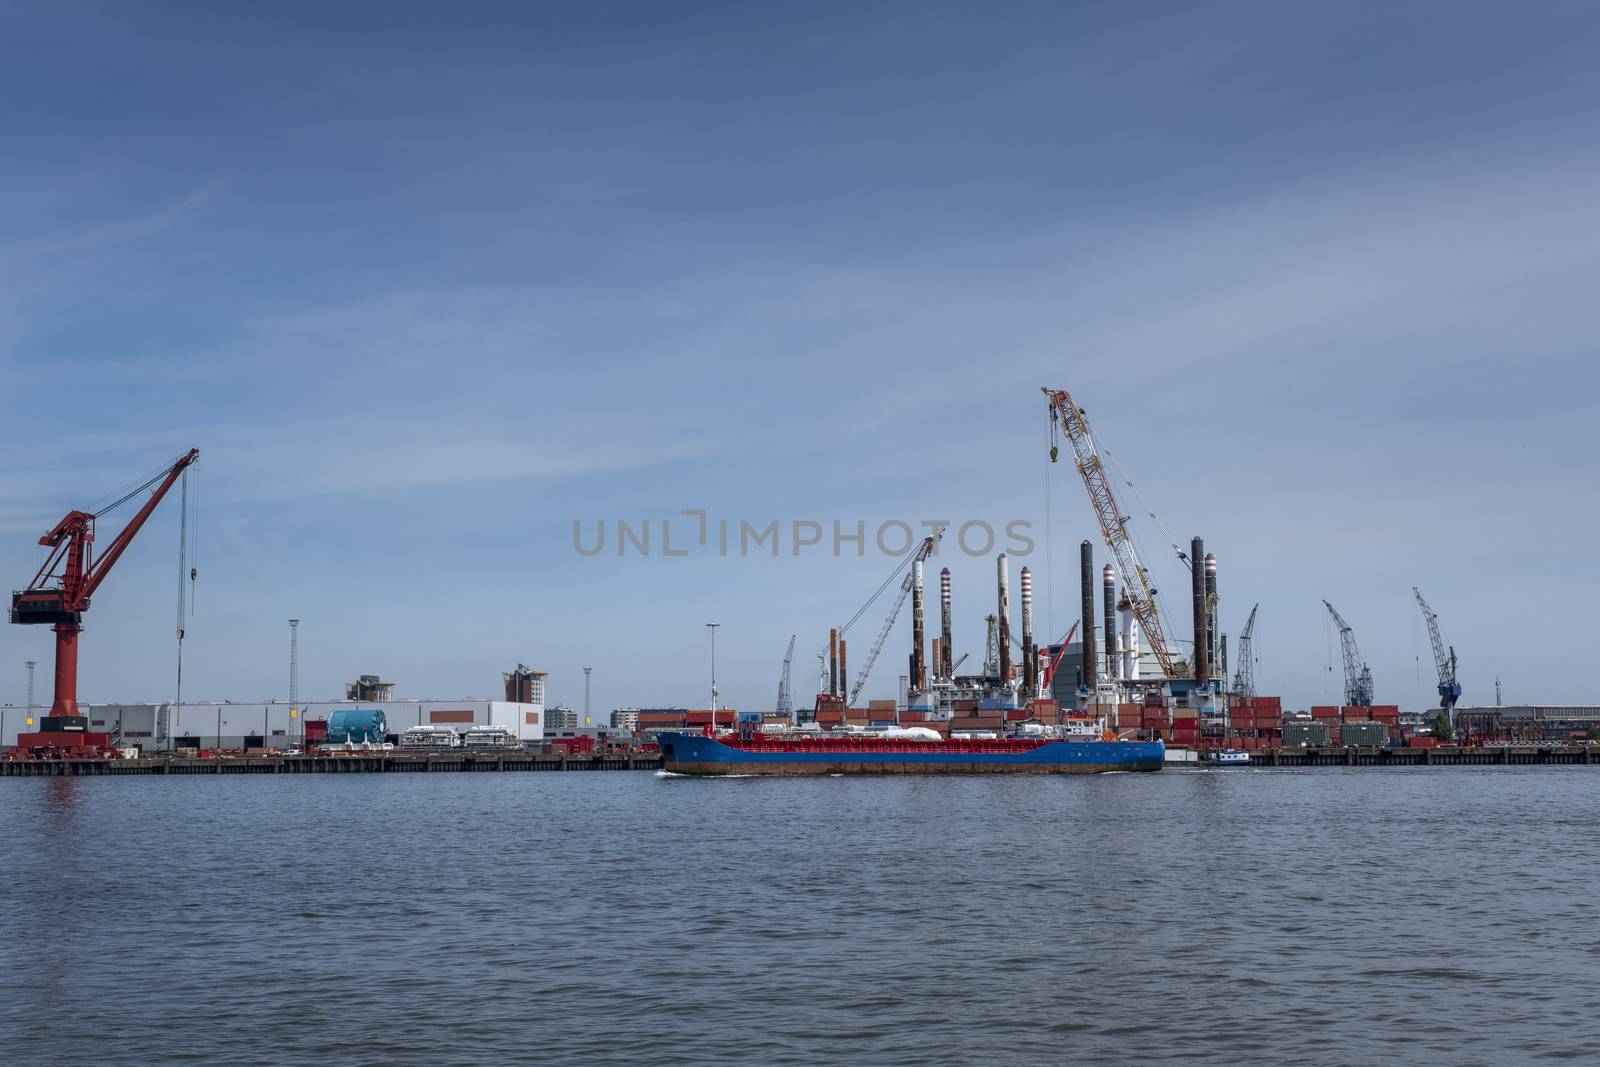 Huge cranes and ships anchored at harbor. International commercial port by Tjeerdkruse